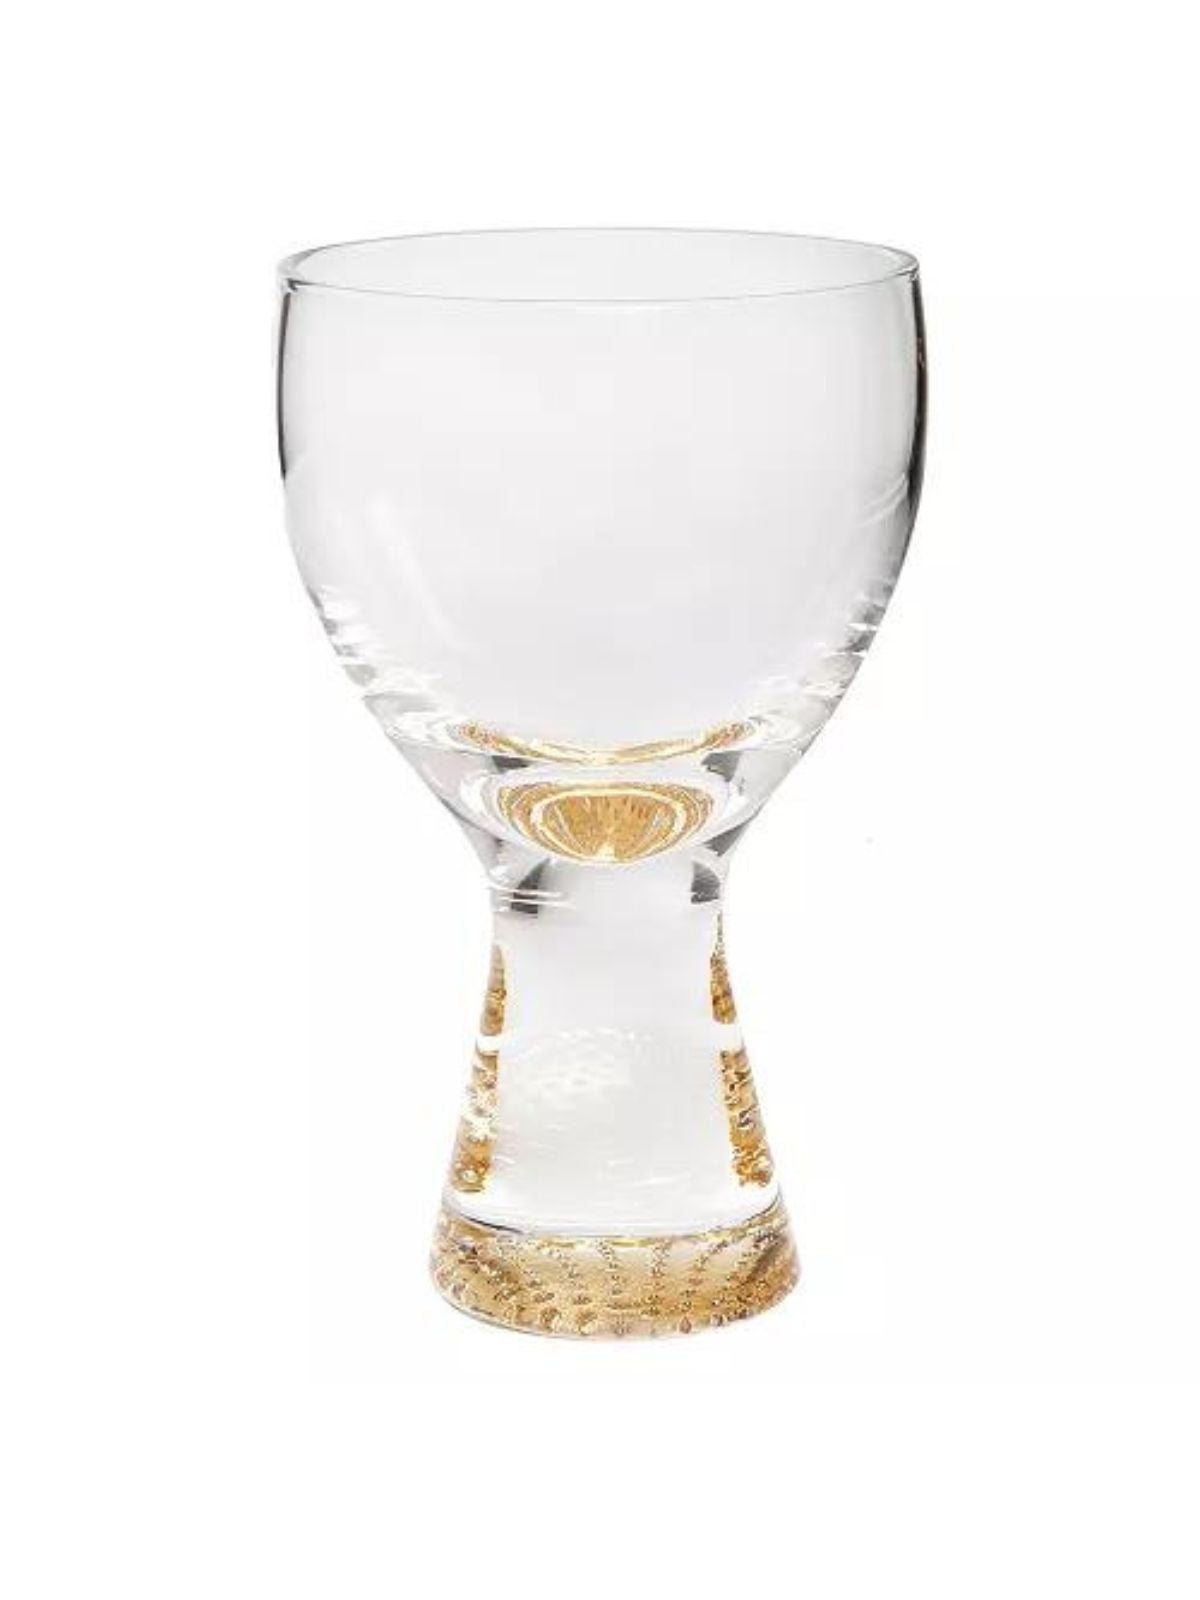 Elevate your occasion with these impressive water glasses. Its beautiful attractive gold-tone reflection bottom along with the clear glass makes it look extremely amazing.